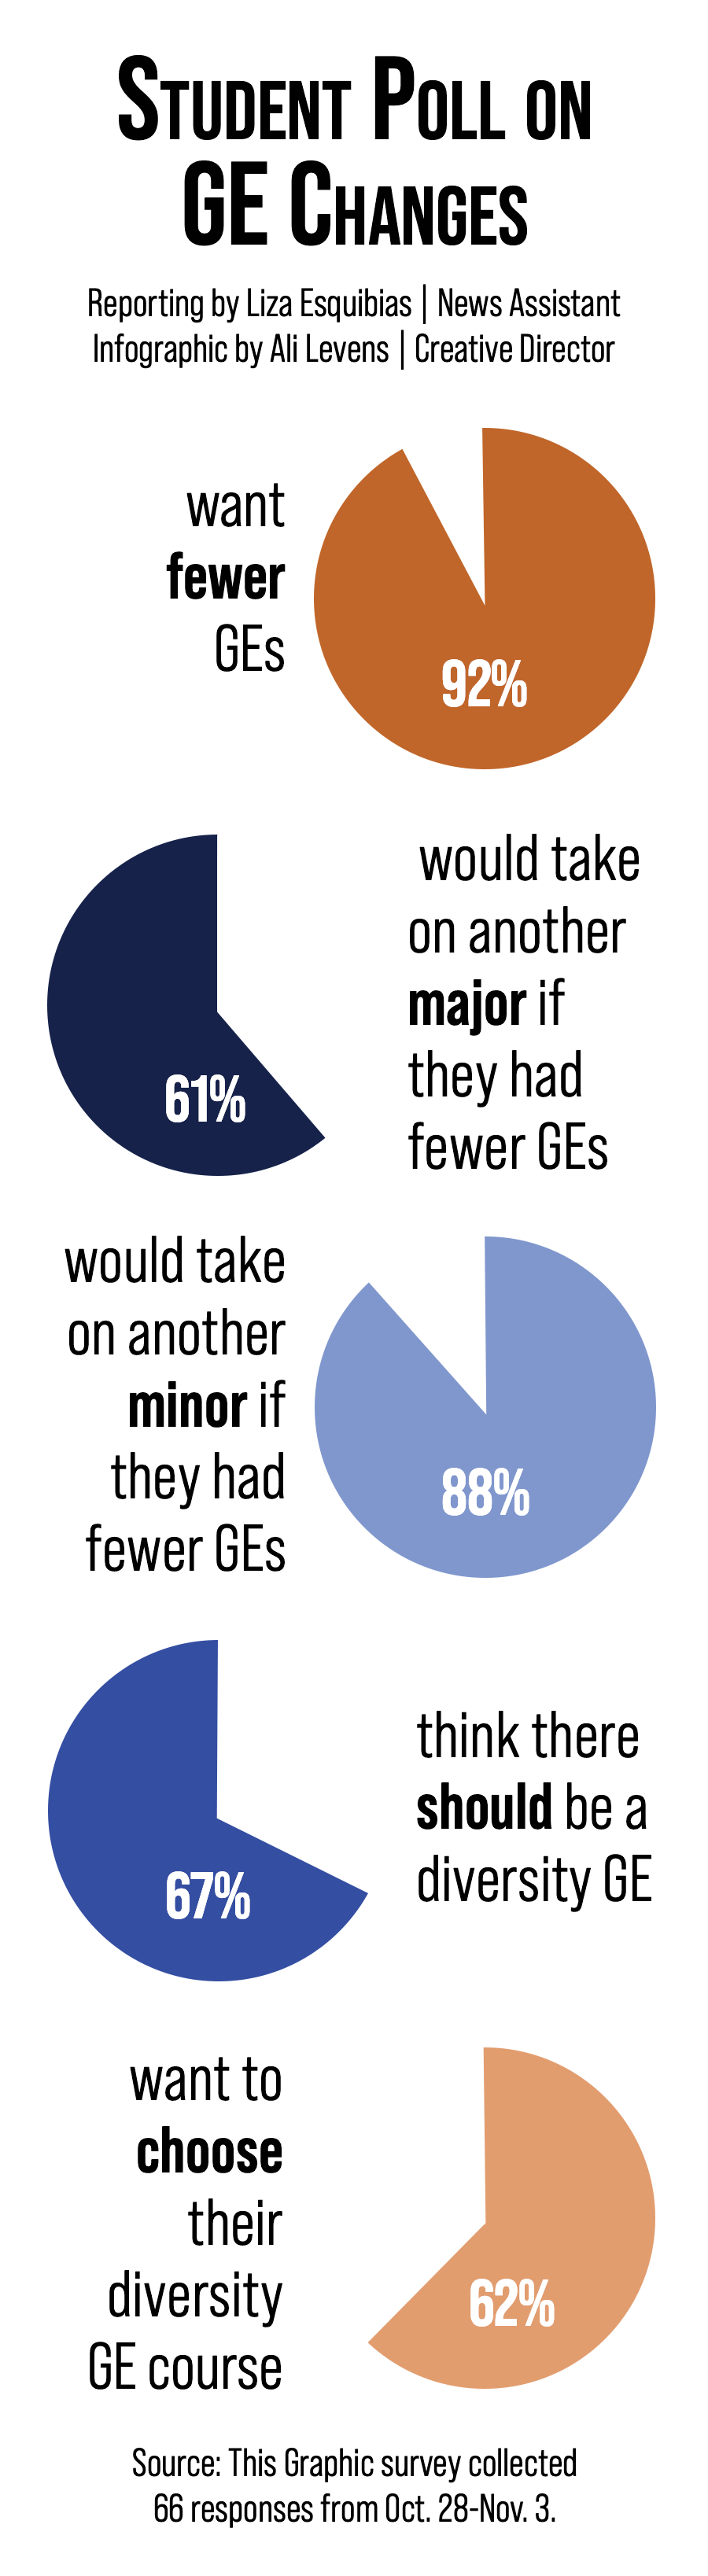 Surveyed students indicate they want fewer GEs in the core curriculum at Pepperdine. Pepperdine proposed a plan transforming the current curriculum, aiming to allow students more diversity and freedom in their education. Graphic by Ali Levens